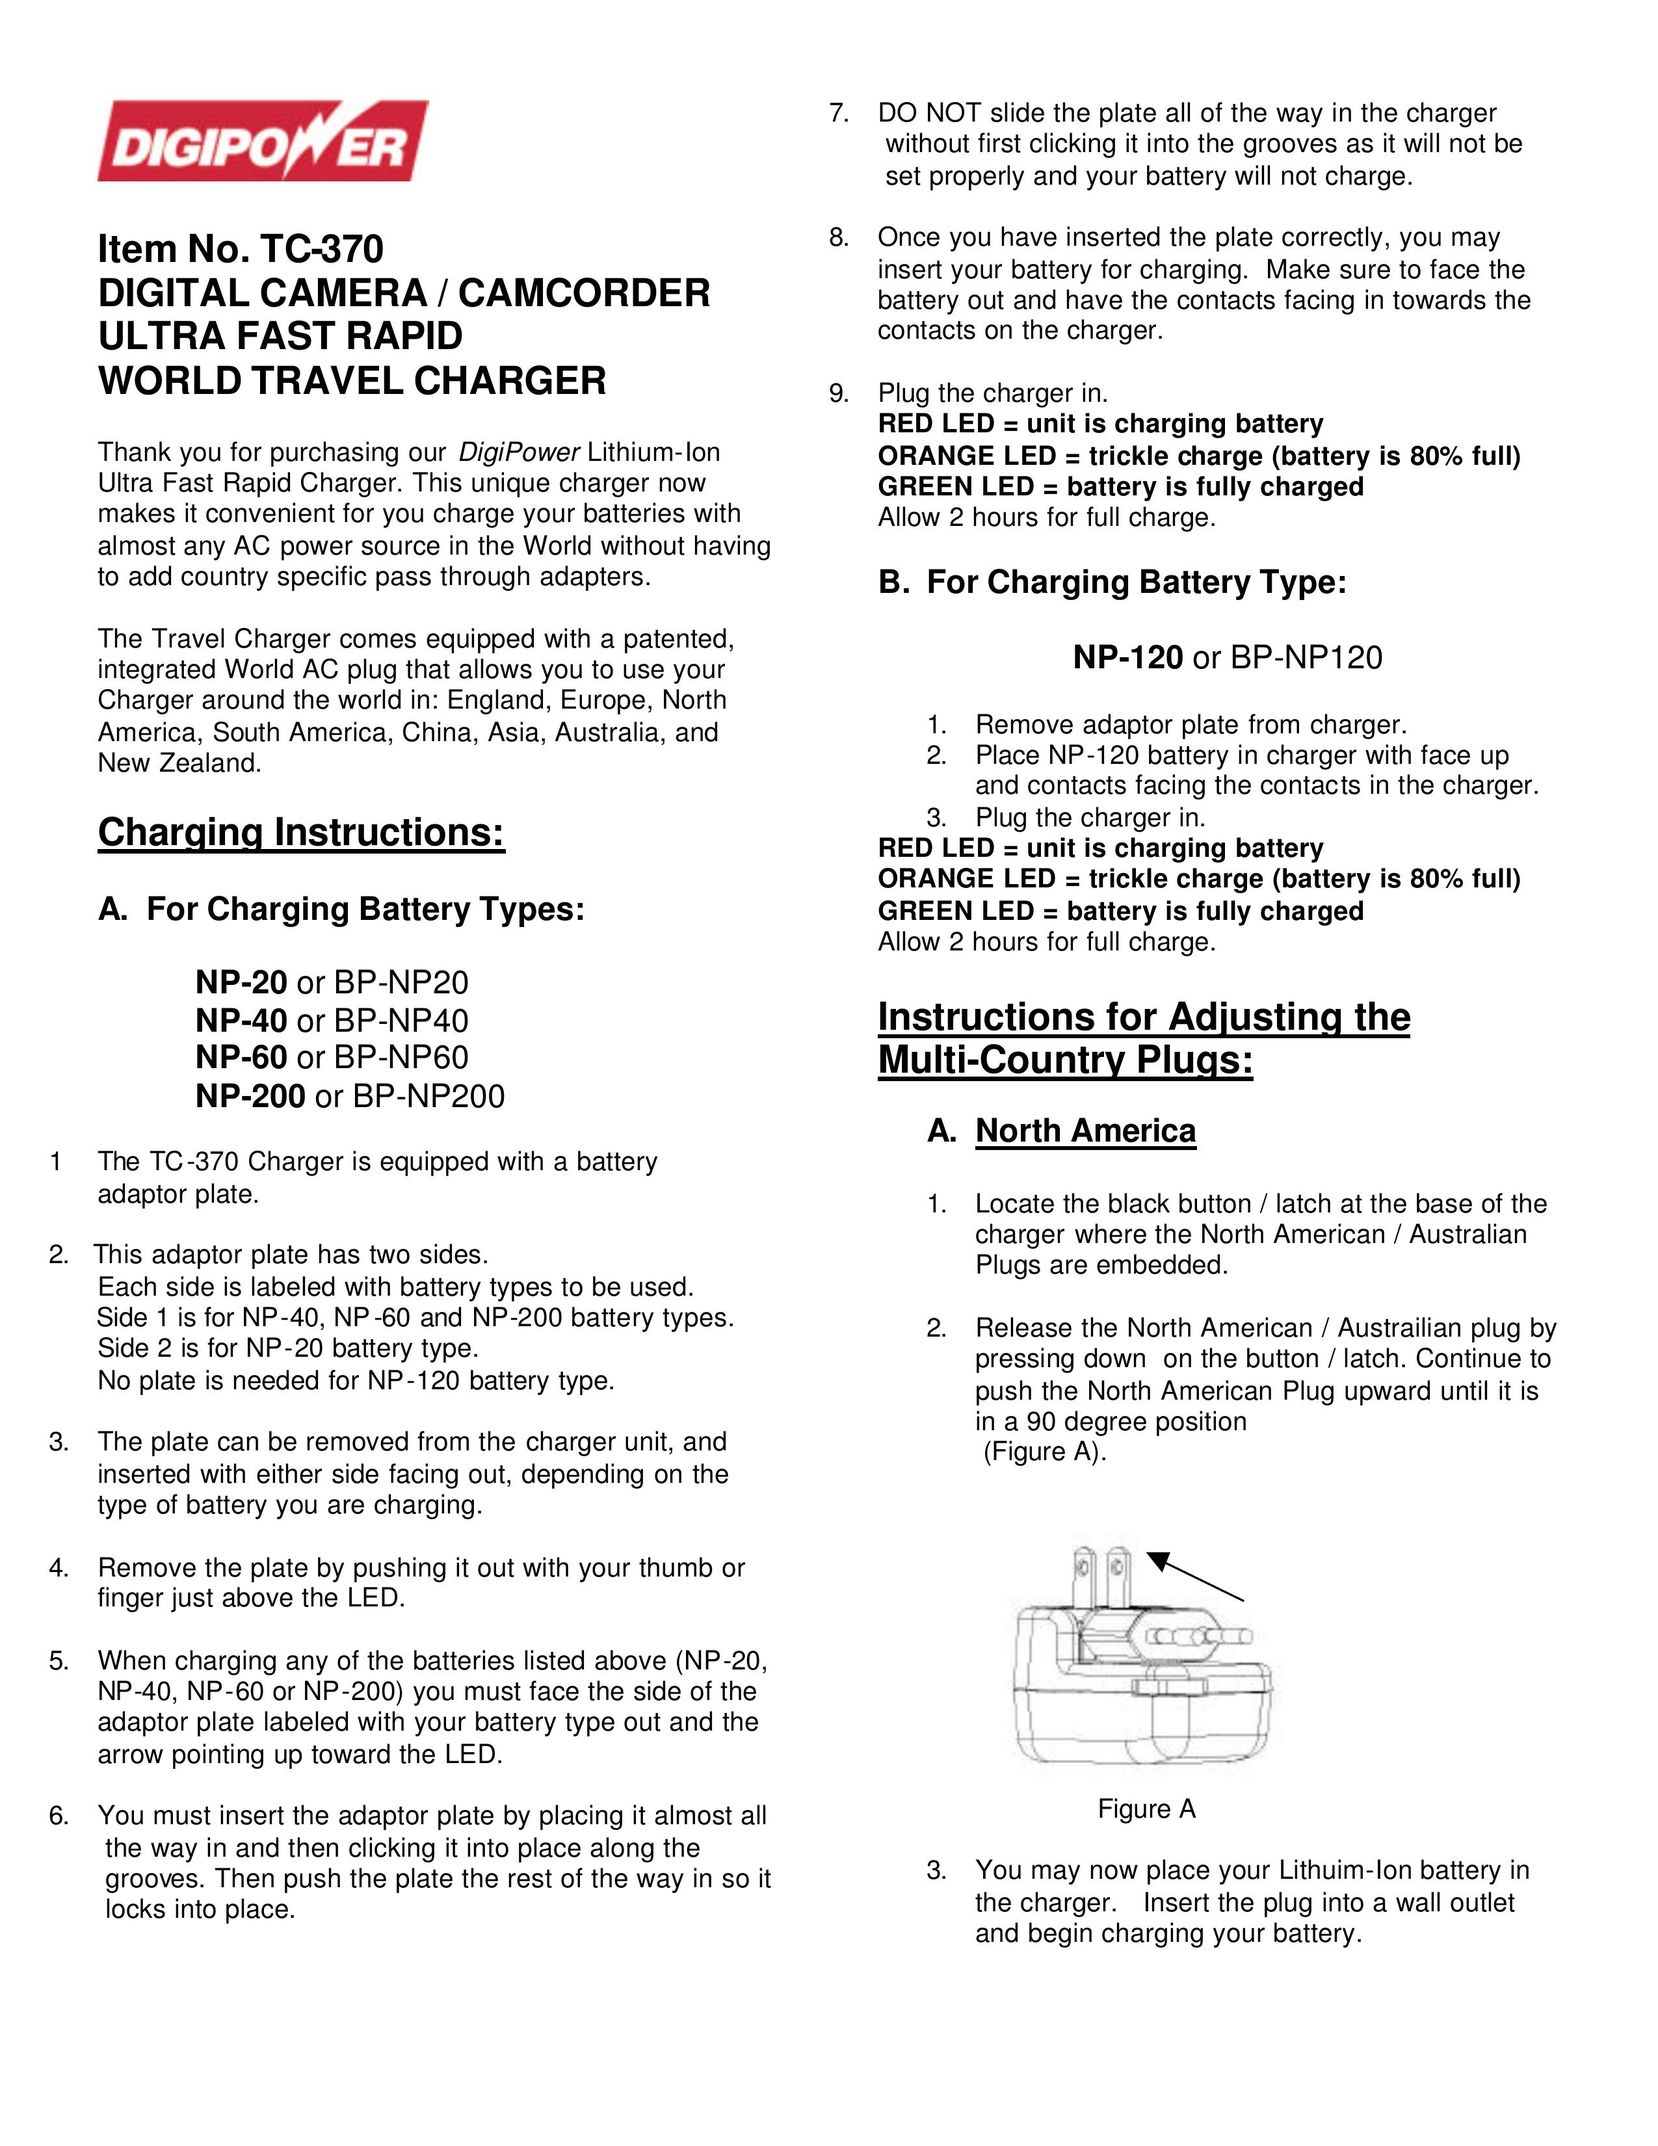 DigiPower TC-370 Battery Charger User Manual